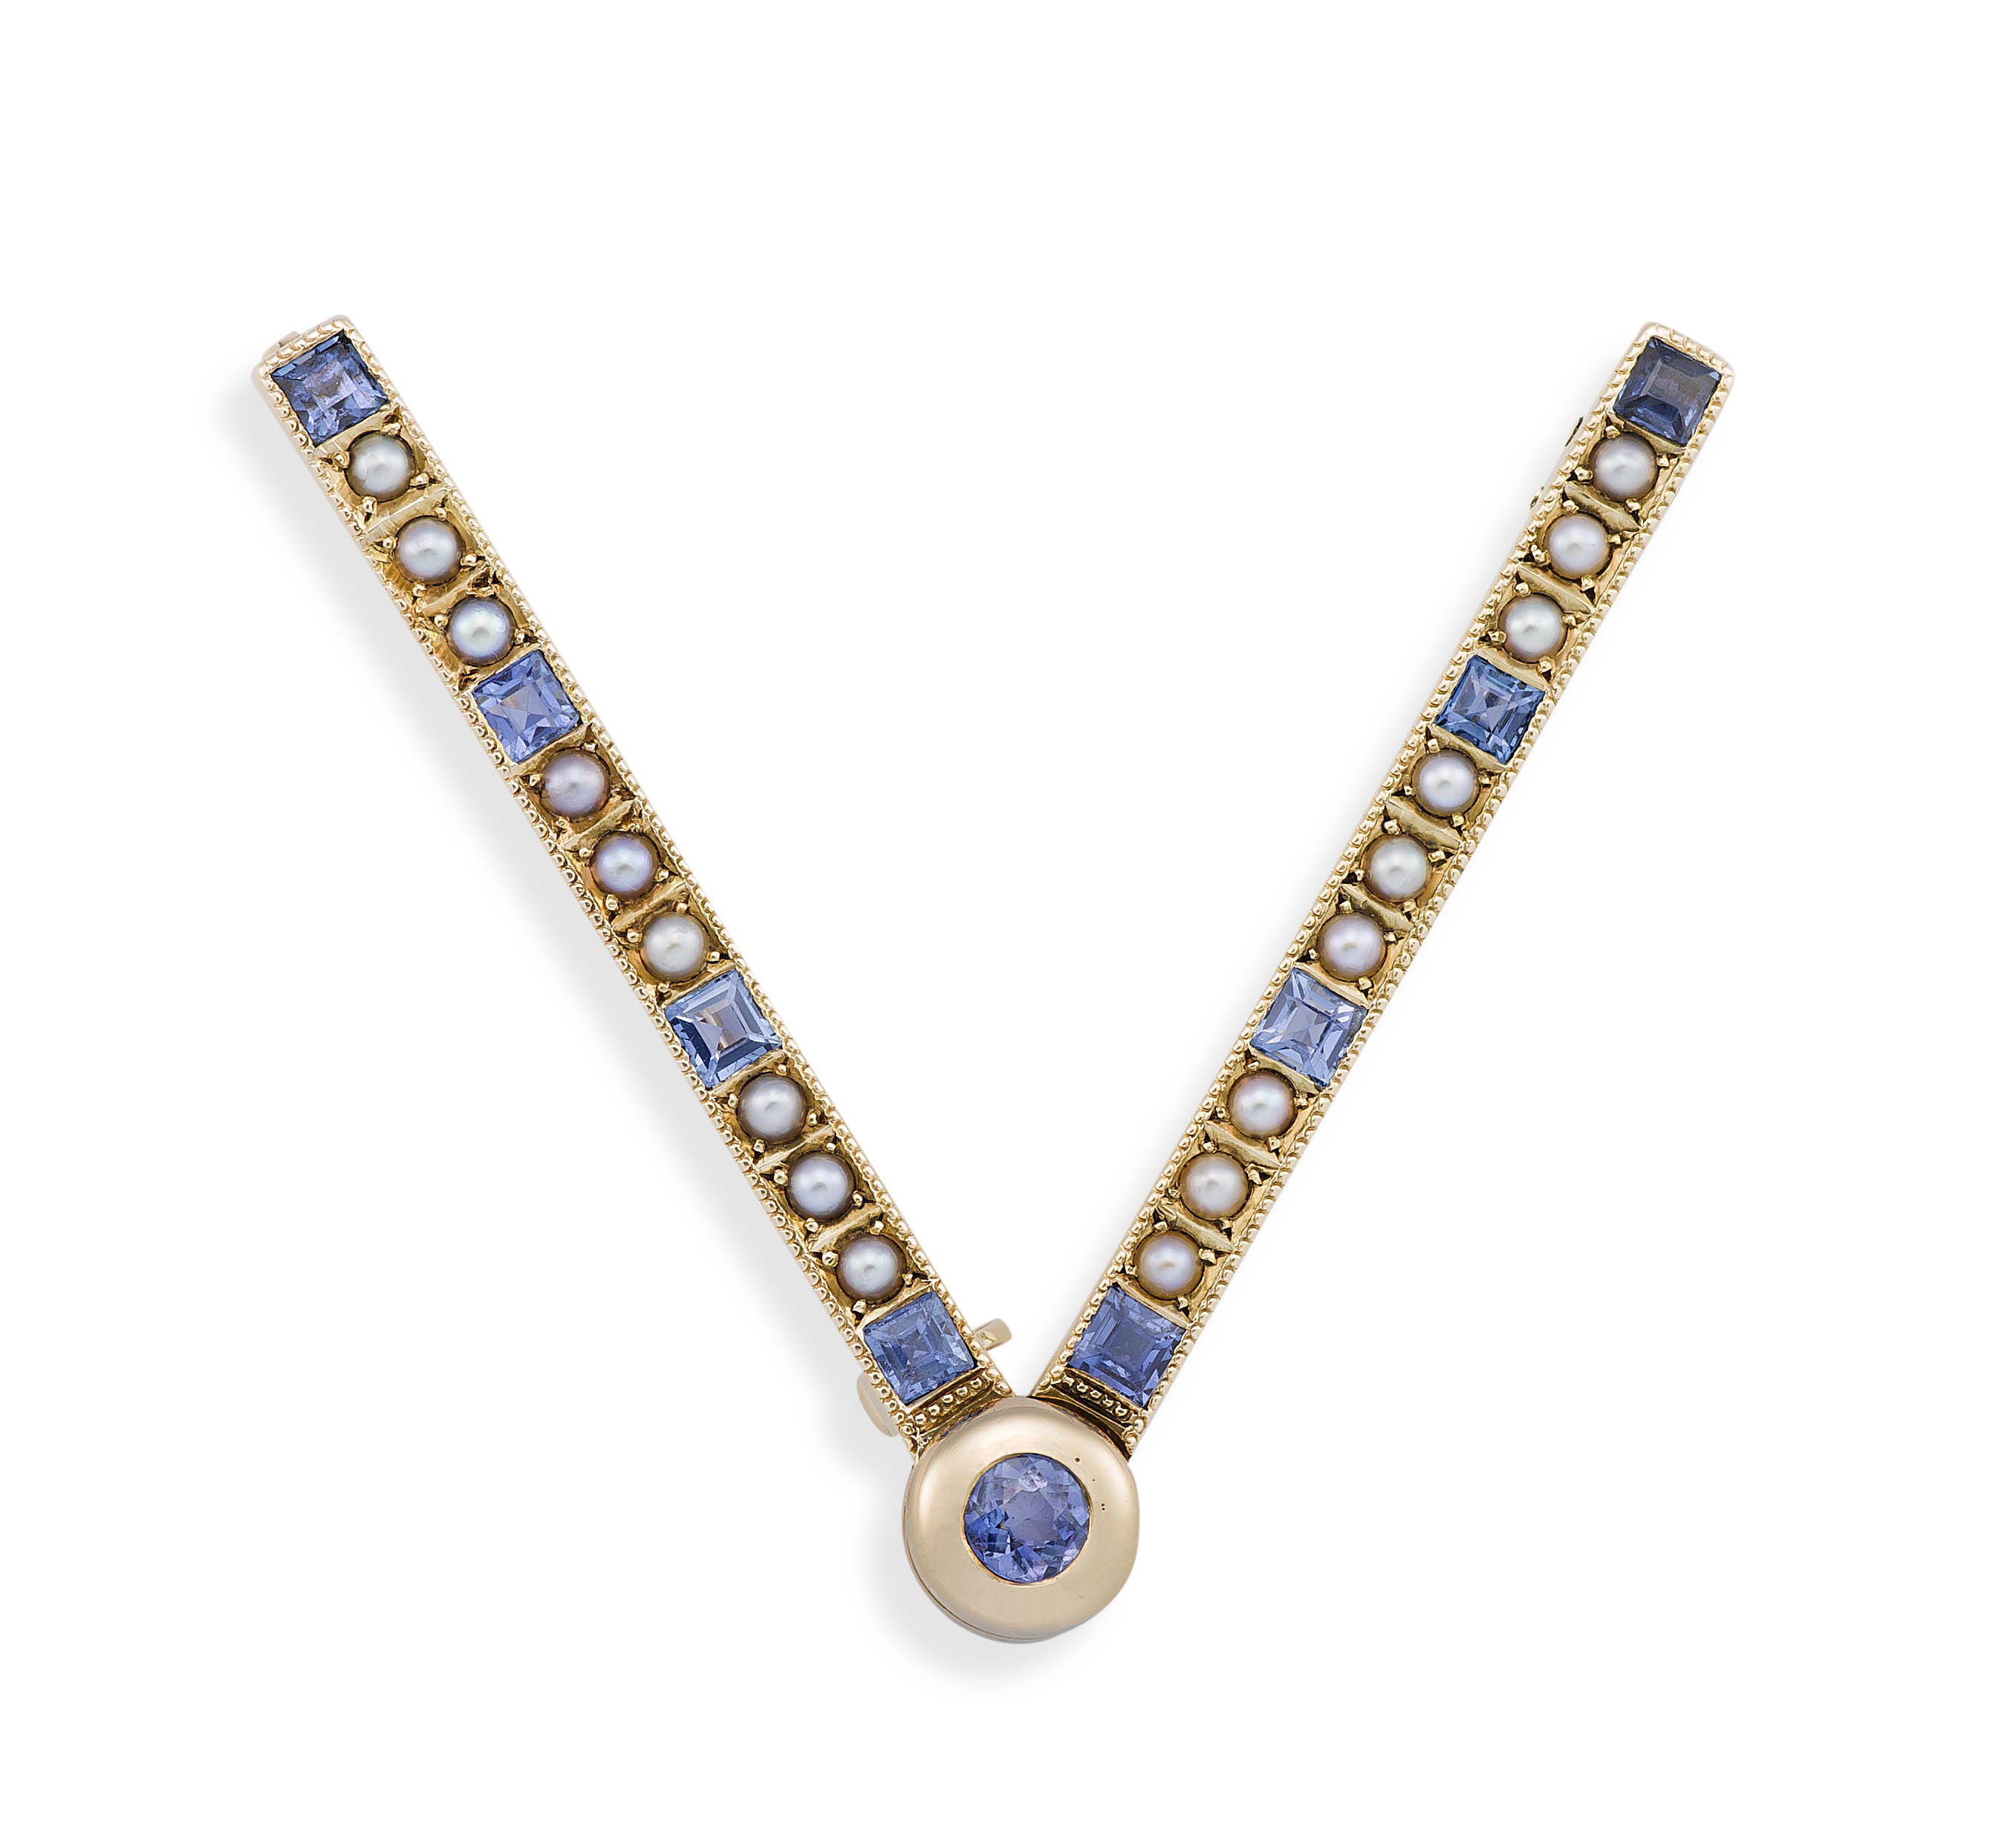 Blue-sapphire, pearl and gold ''Victory'' brooch, circa 1945